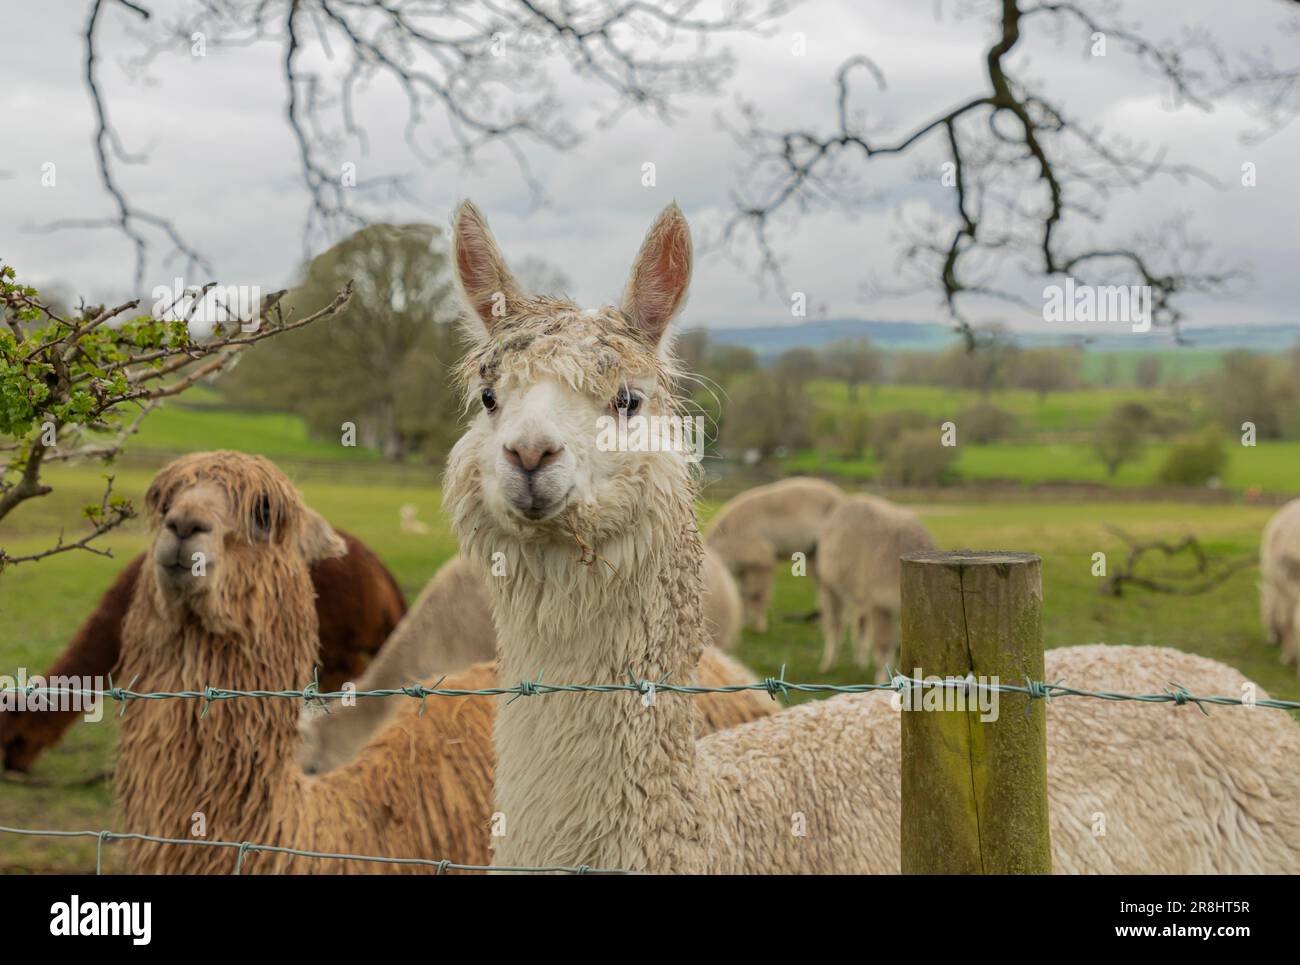 Two wet llamas looking over a fence in the early Spring Stock Photo